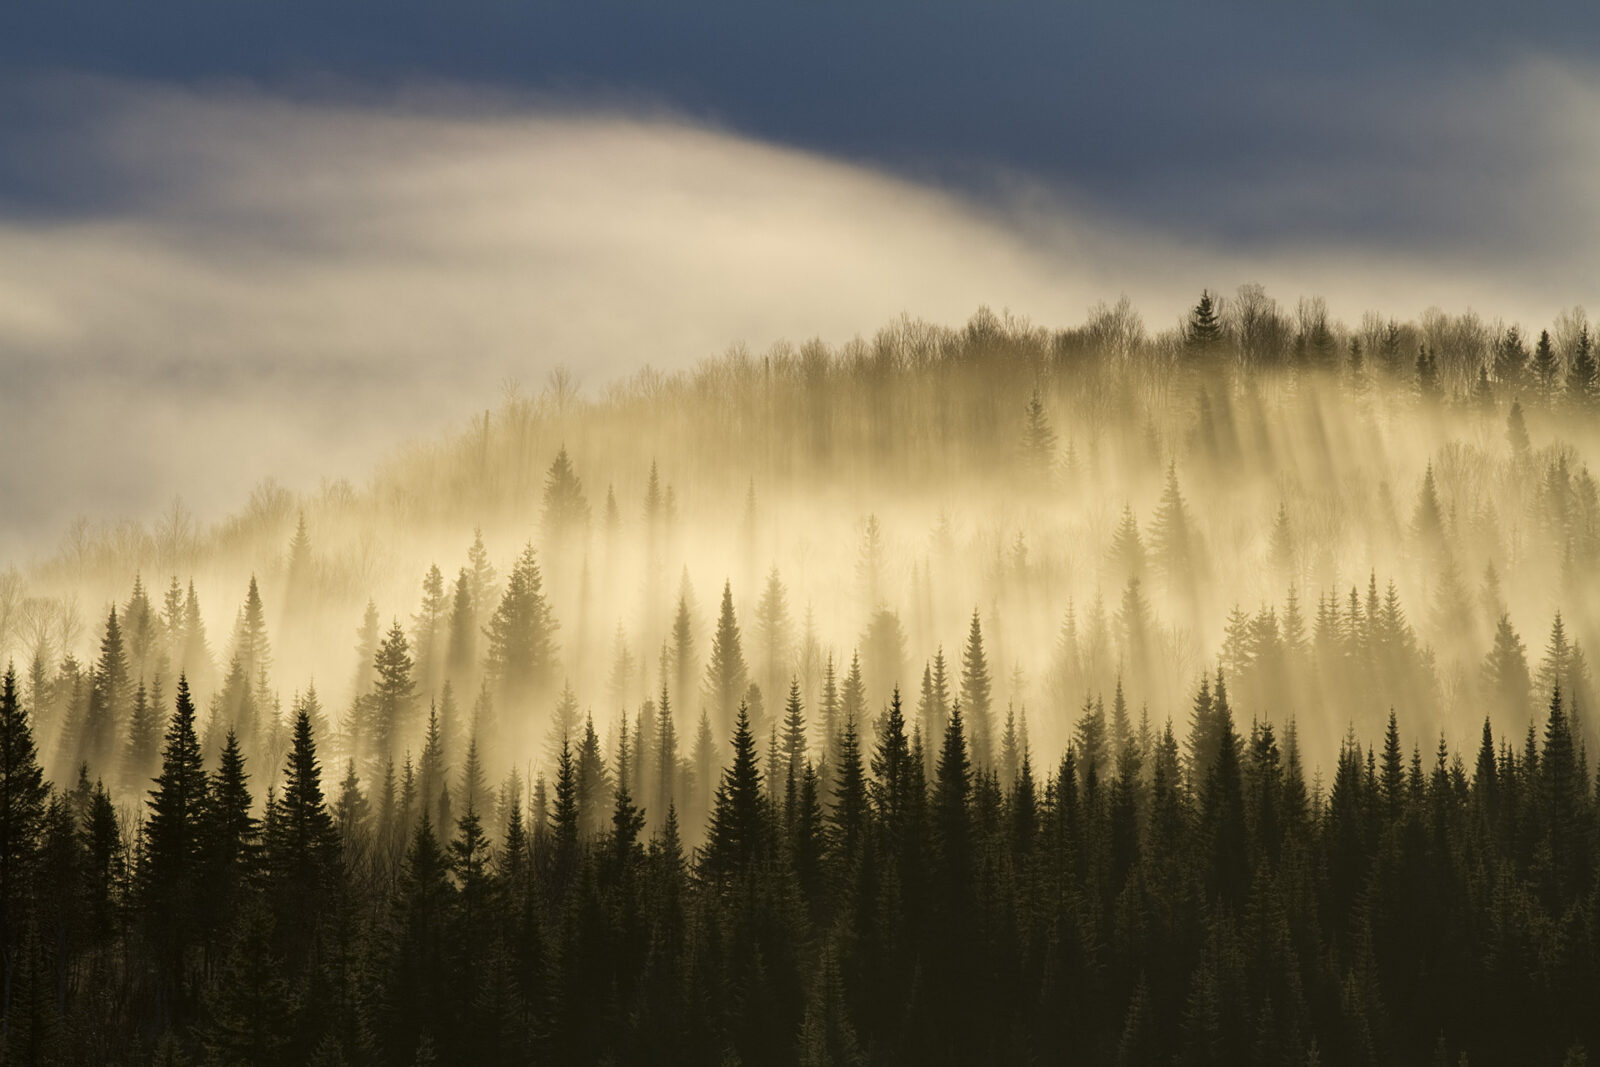 Tall trees on a mountain are surrounded by a misty, white fog.